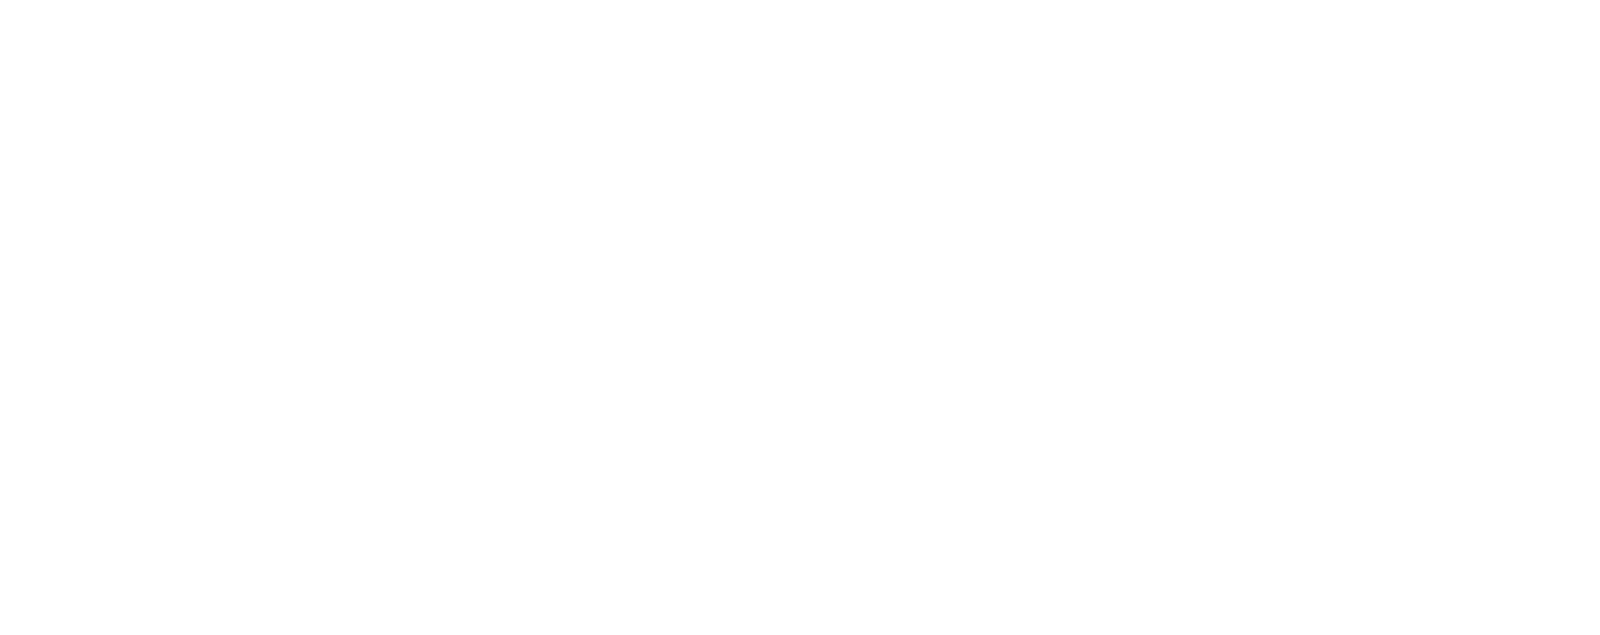 Line illustrations to convey the dimensions of the Aeron Chair. Size B, medium, has a total height of 36.75 – 43.25